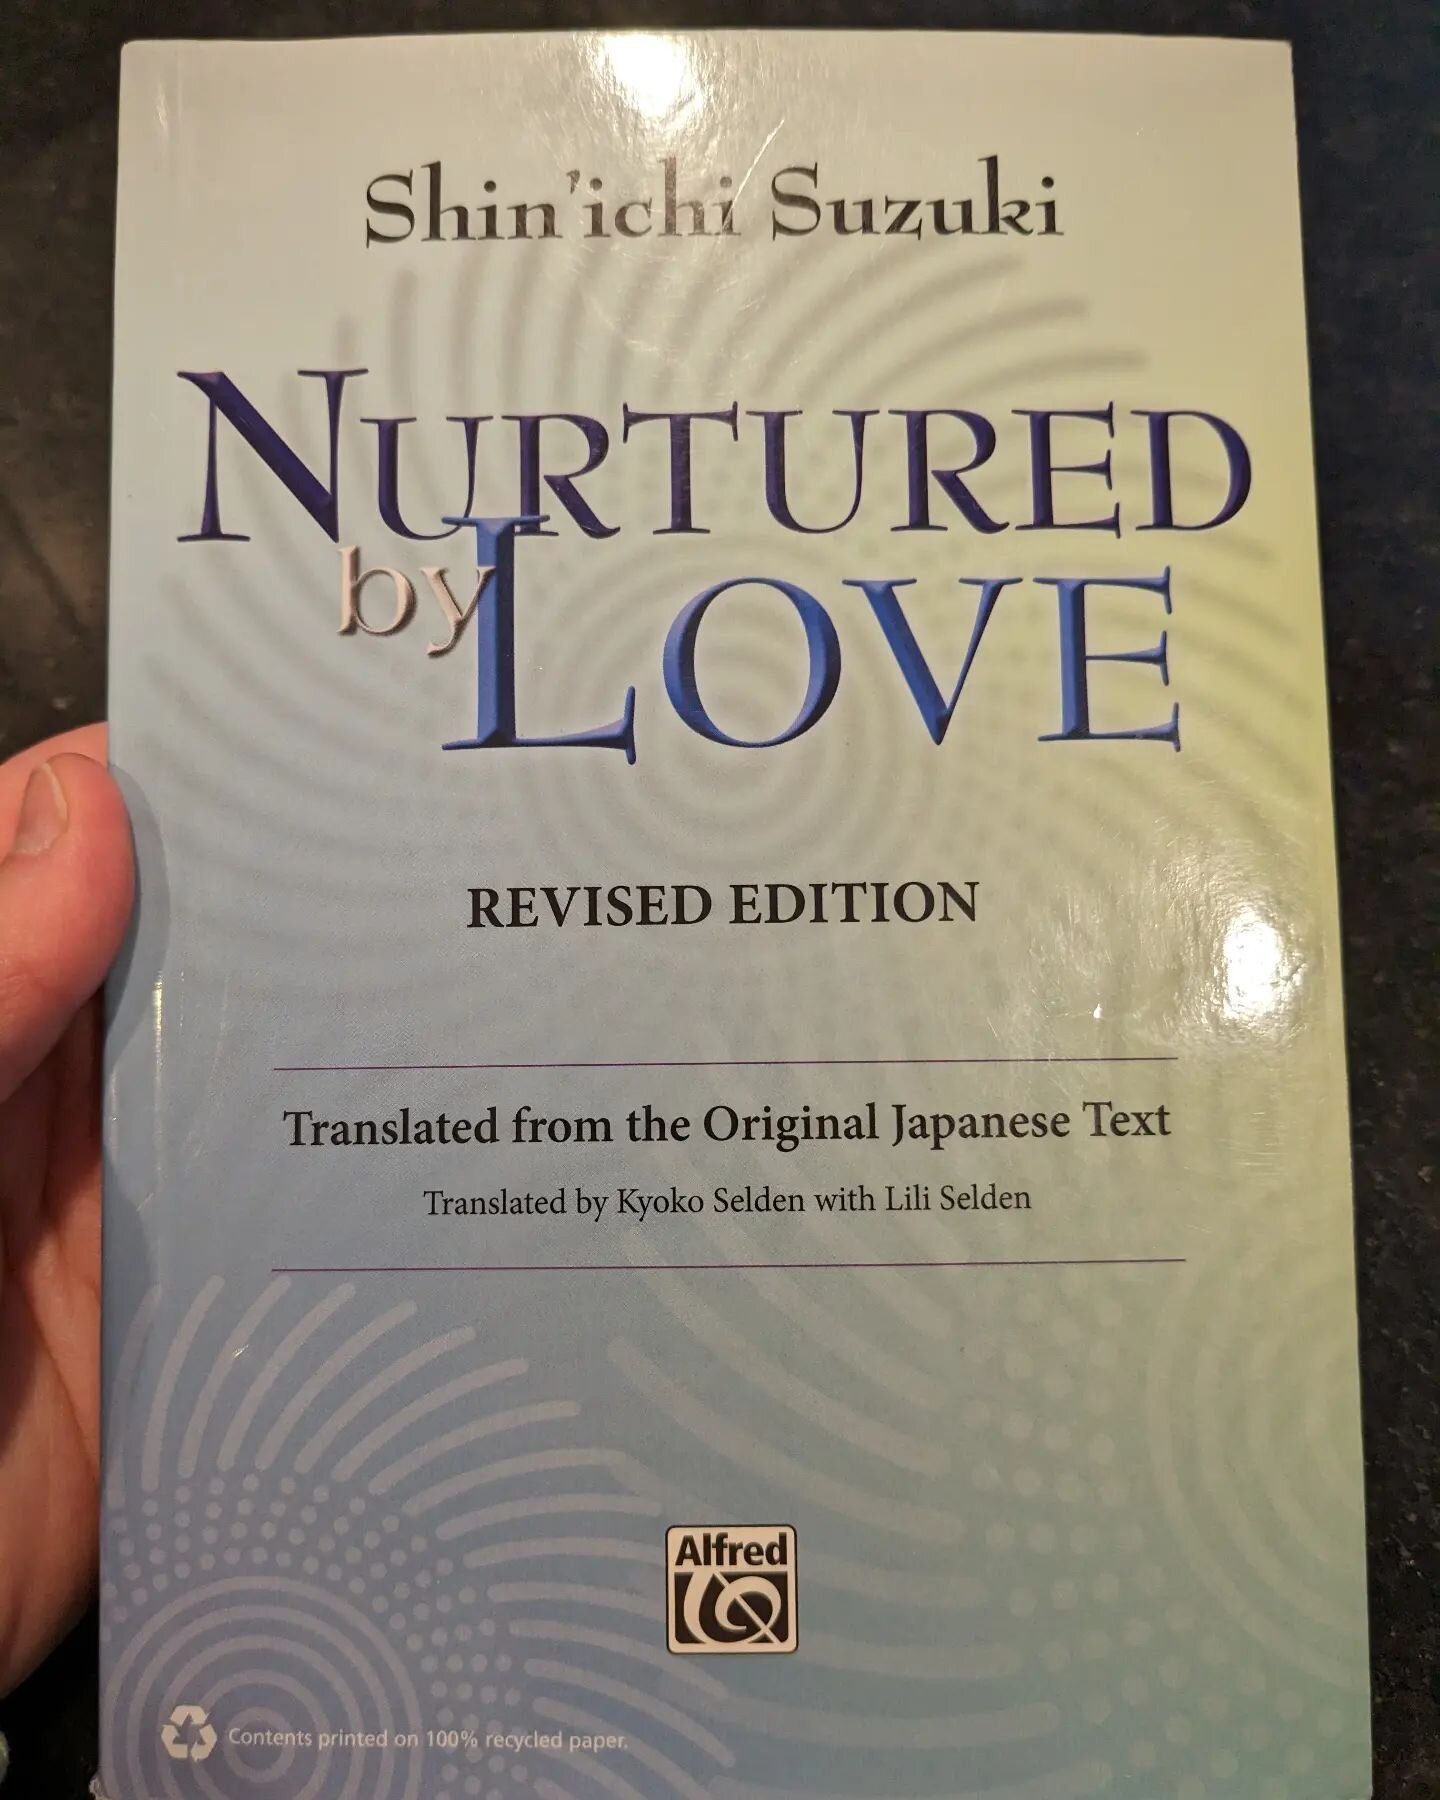 Today's Suzuki workshop emphasizes love and connection with students over everything else. Suzuki's philosophy was &quot;every child can&quot;! 

#suzuki #musiceducation #musiced #musiceducator #musiceducators #teachhervoice #teachers #teachersofig #